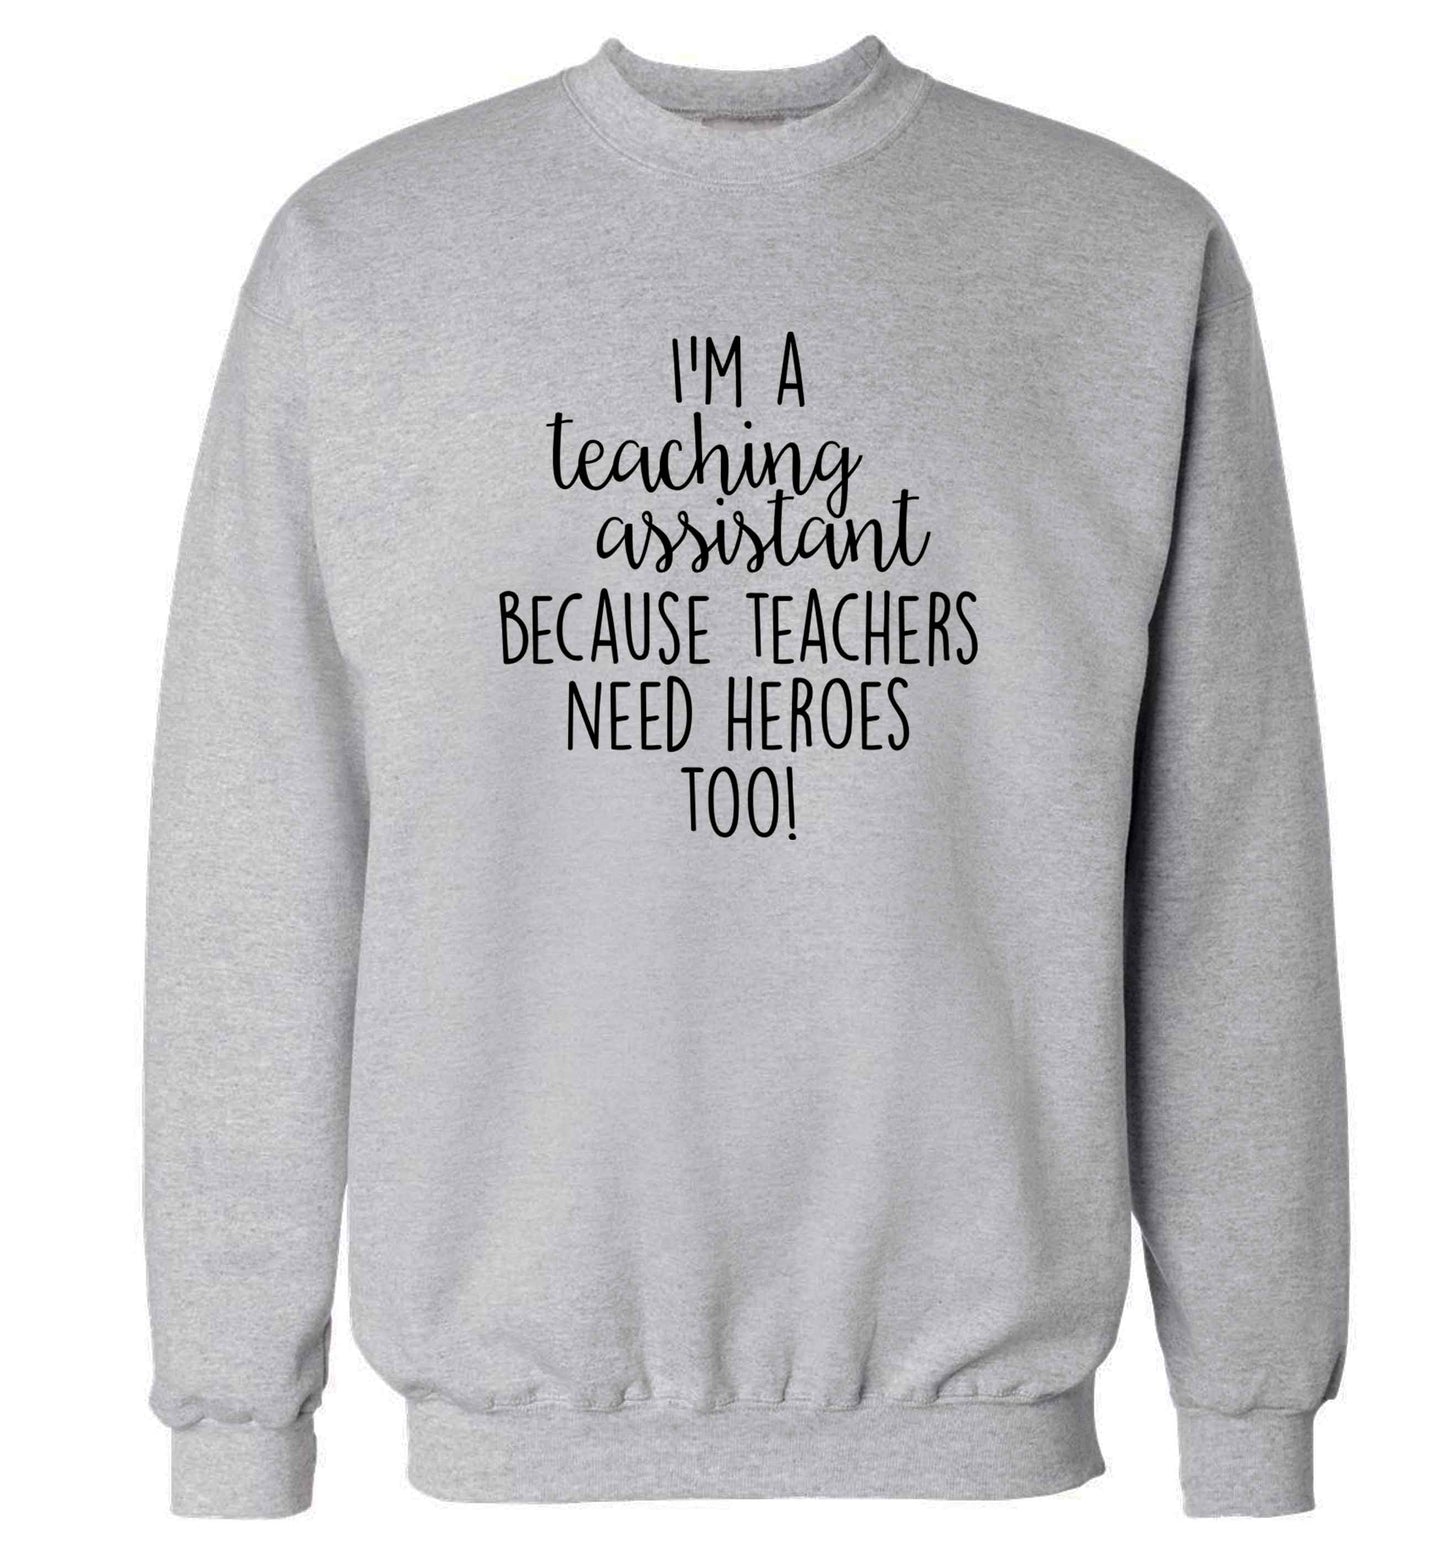 I'm a teaching assistant because teachers need heroes too! adult's unisex grey sweater 2XL